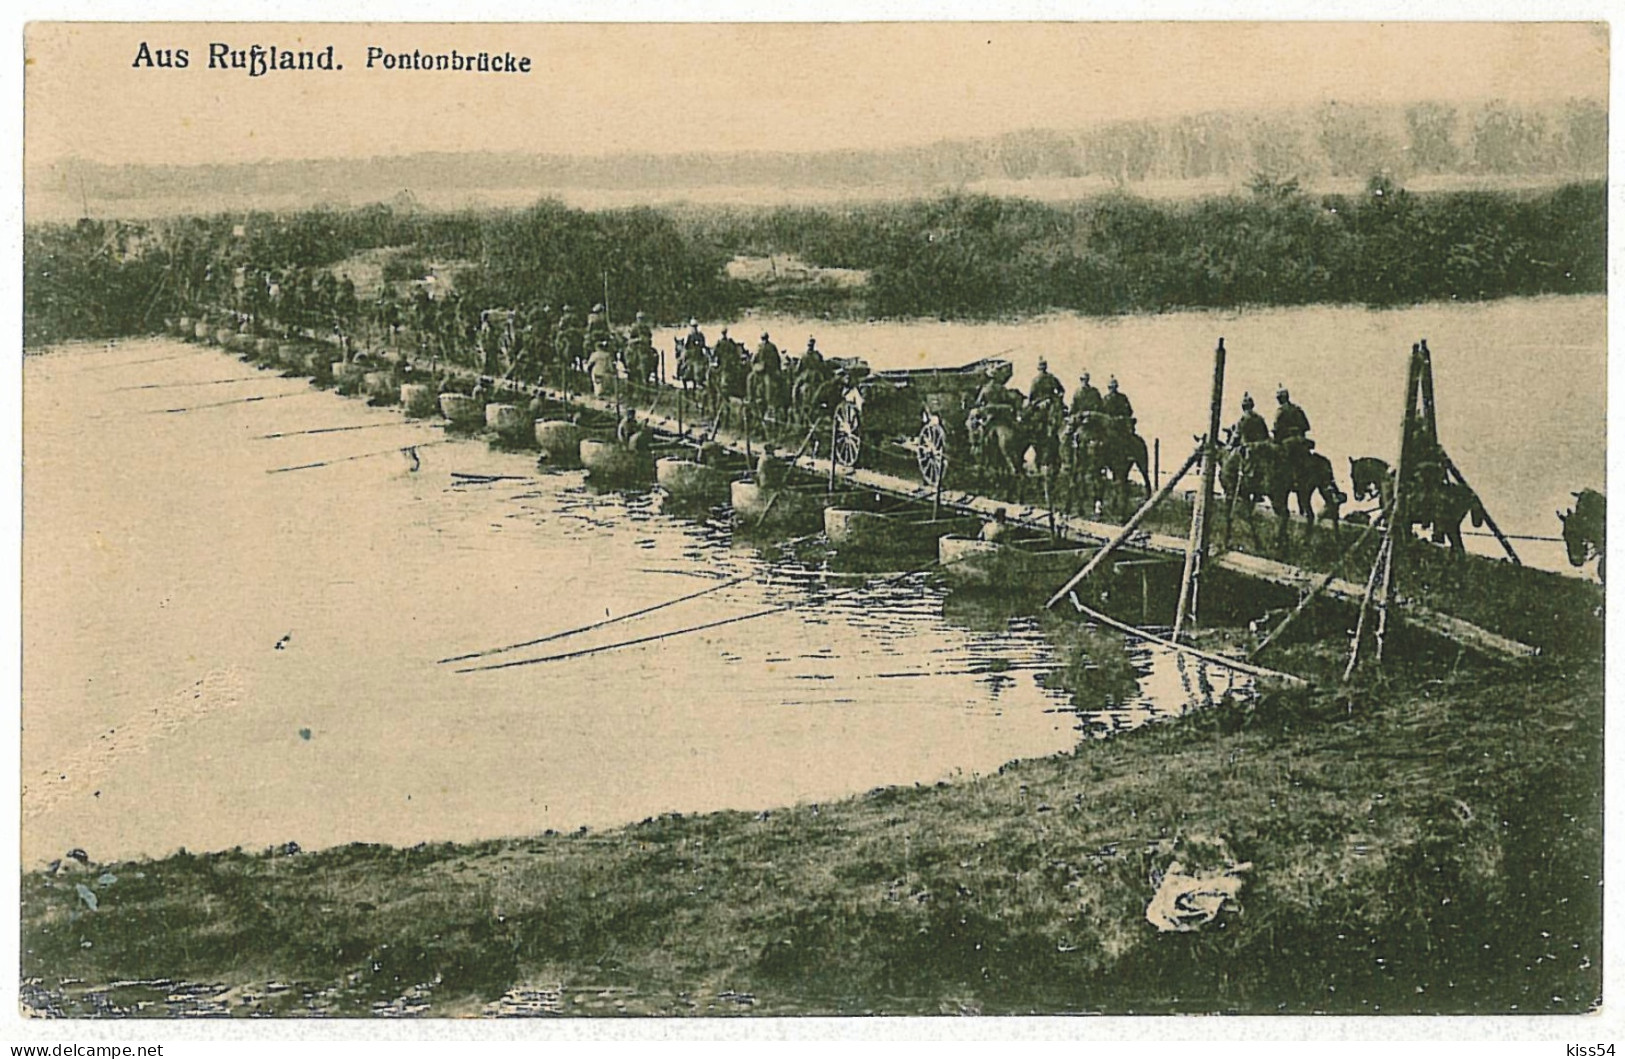 RUS 57 - 5061 Russian Army On The Pontoon, Russia - Old Postcard - Used - 1916 - Rusland